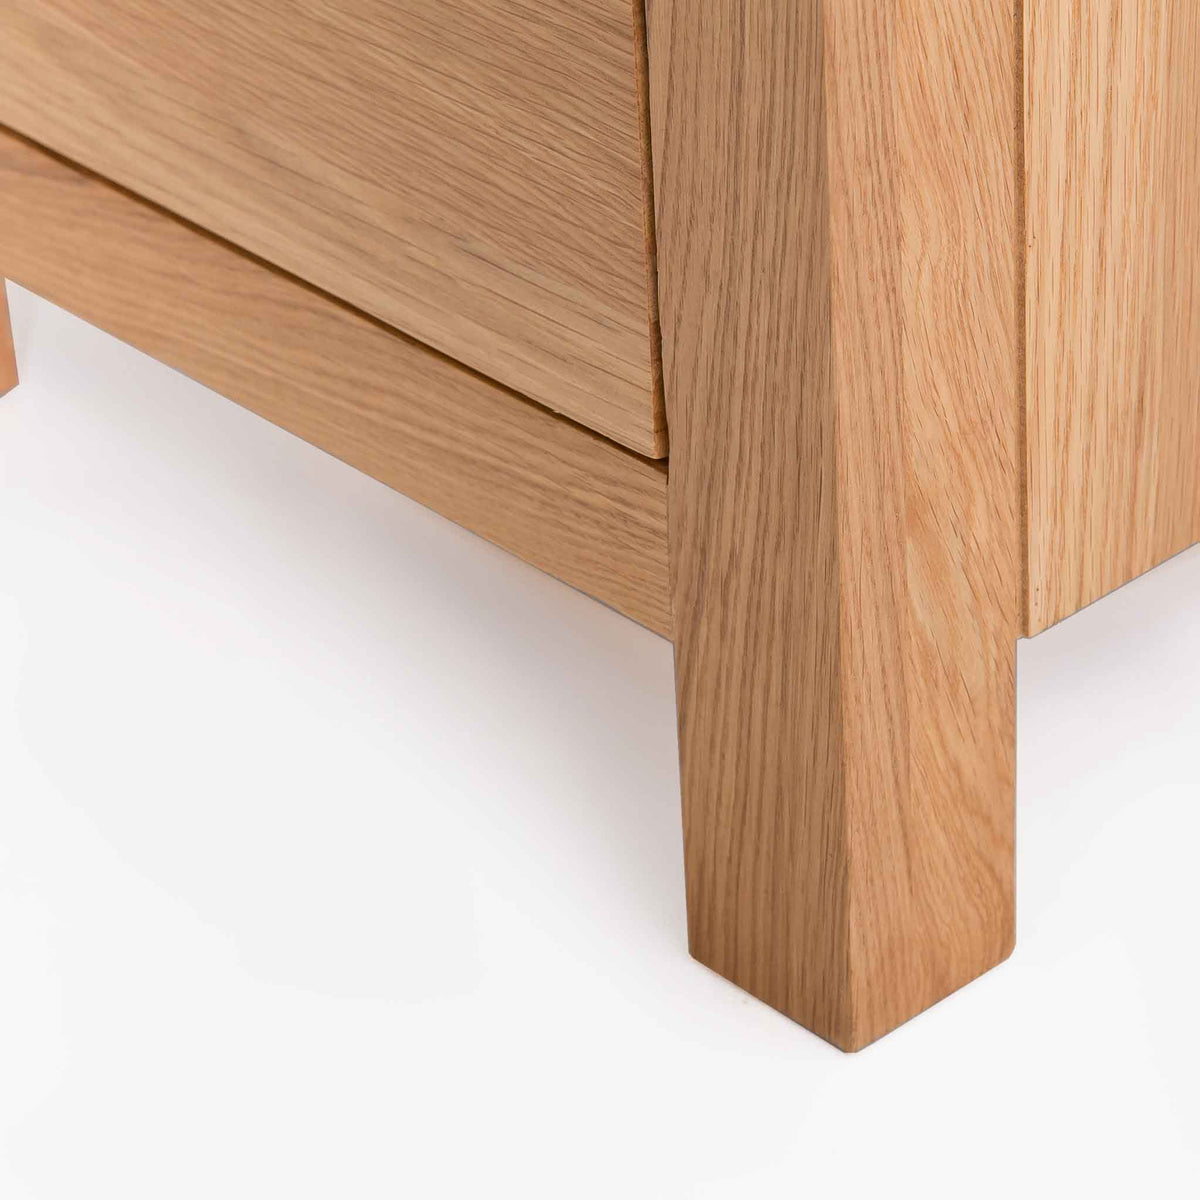 London Oak Tallboy Chest - Close up of foot